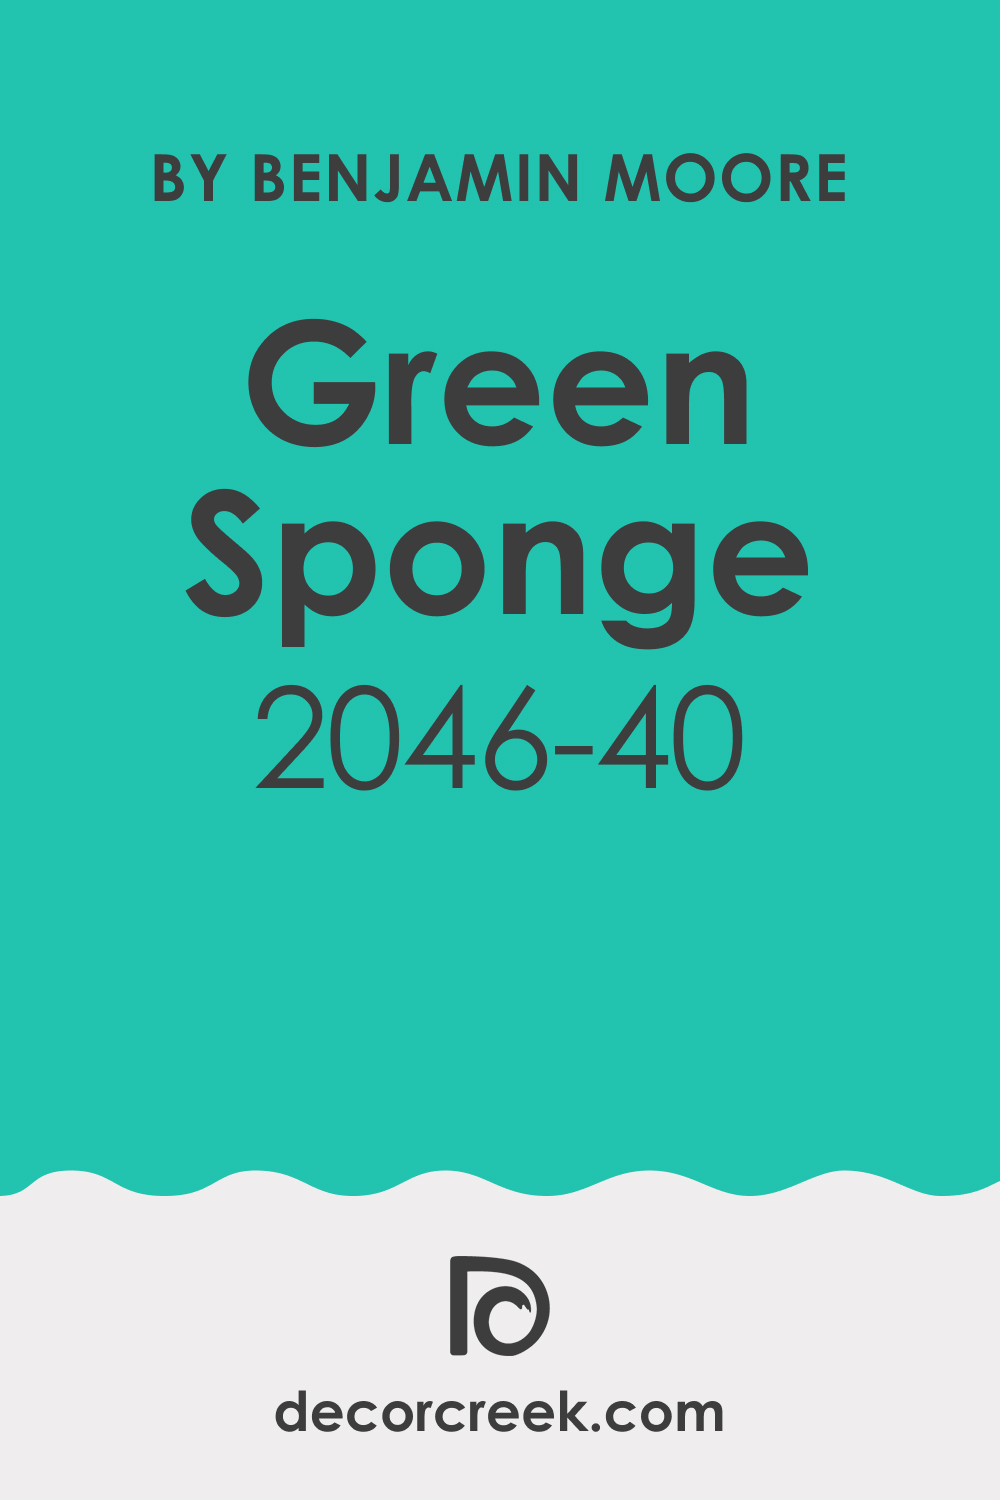 What Color Is Green Sponge 2046-40?